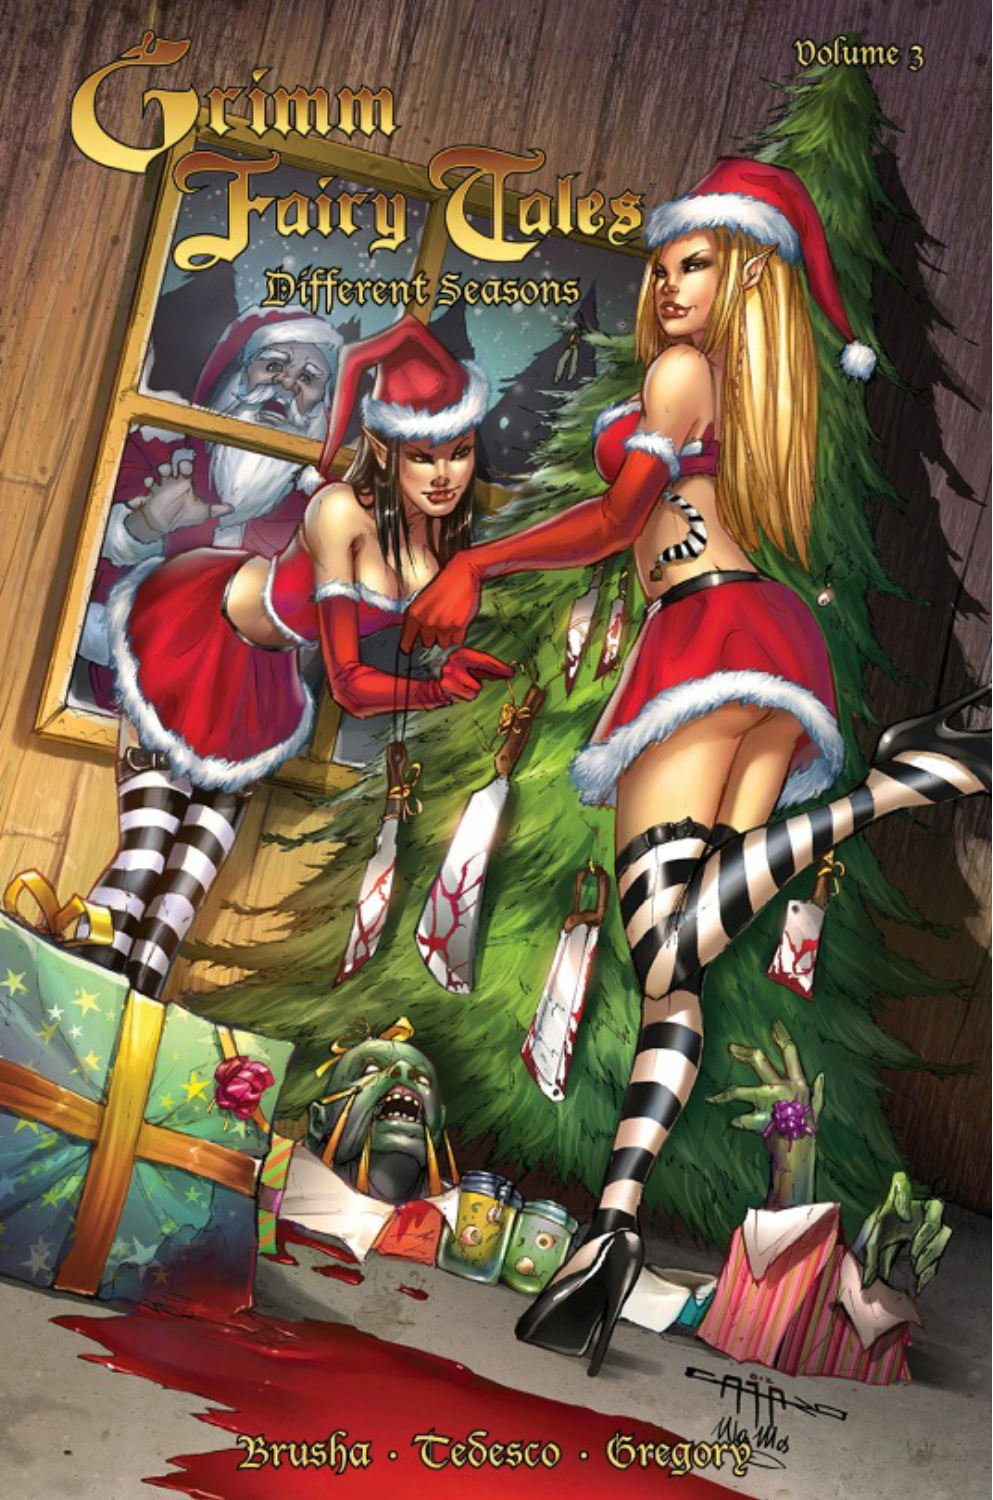 Grimm Fairy Tales Different Seasons Graphic Novel Volume 3